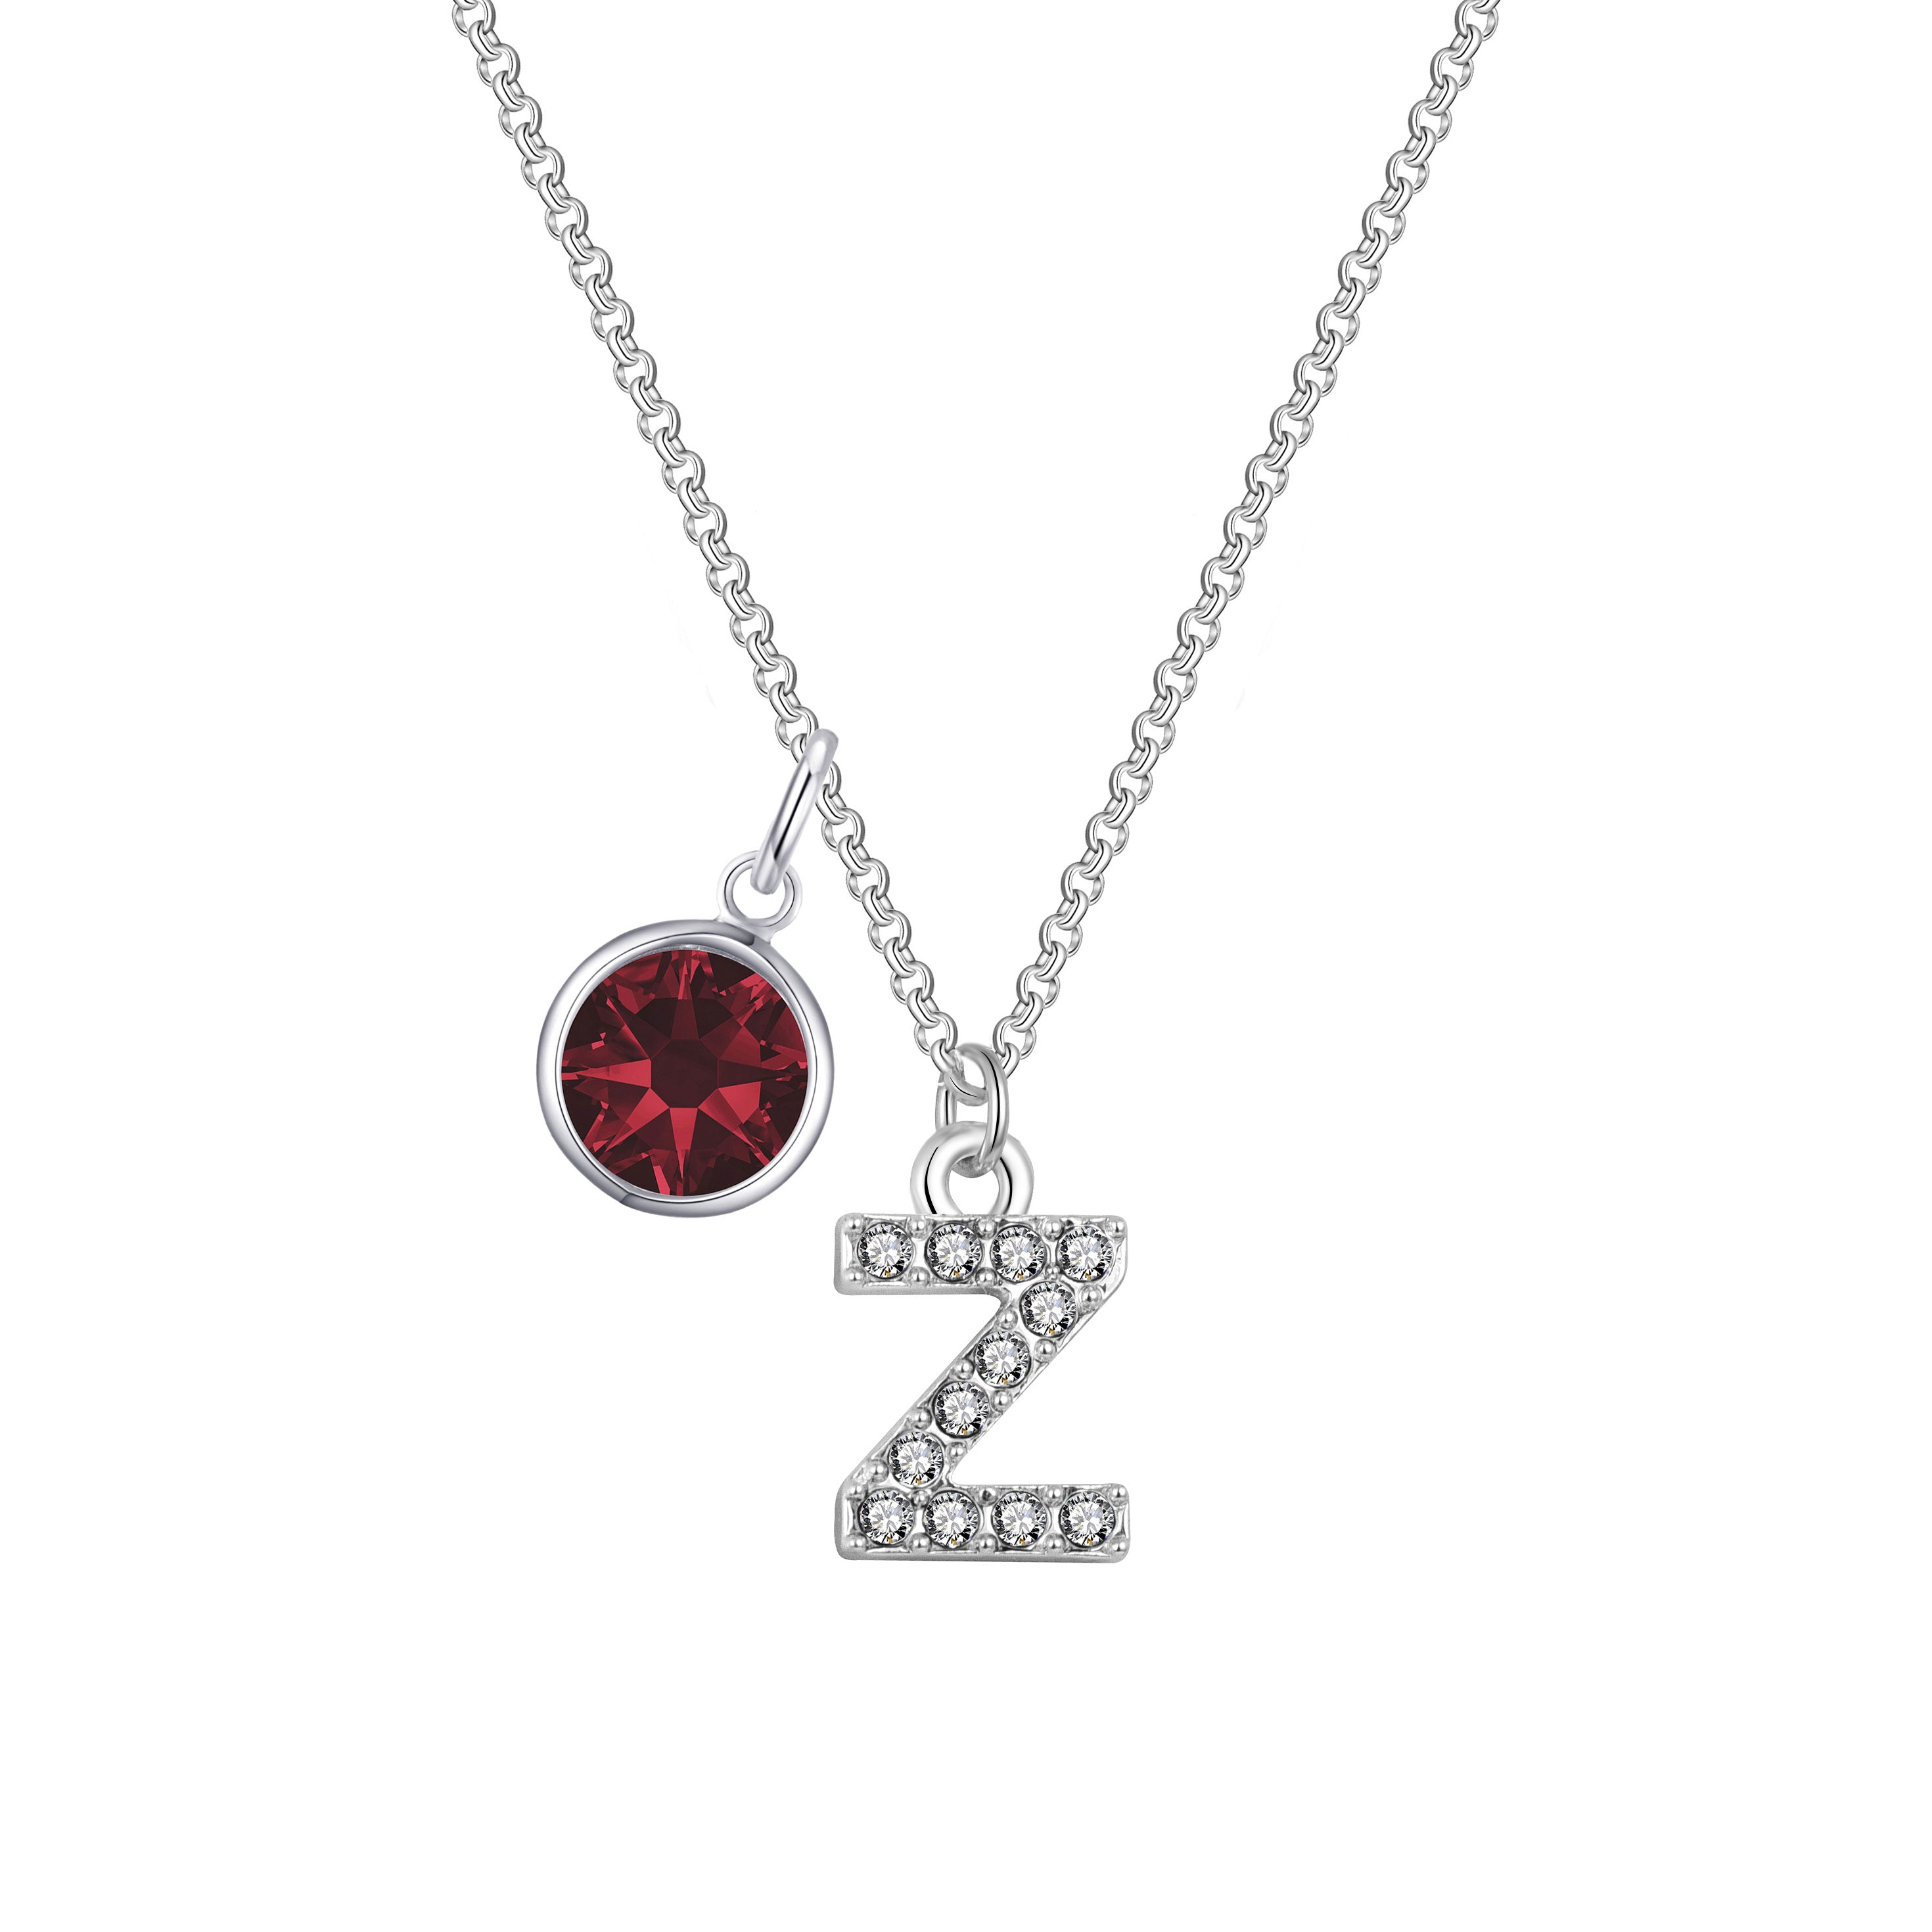 Pave Initial Z Necklace with Birthstone Charm Created with Zircondia® Crystals